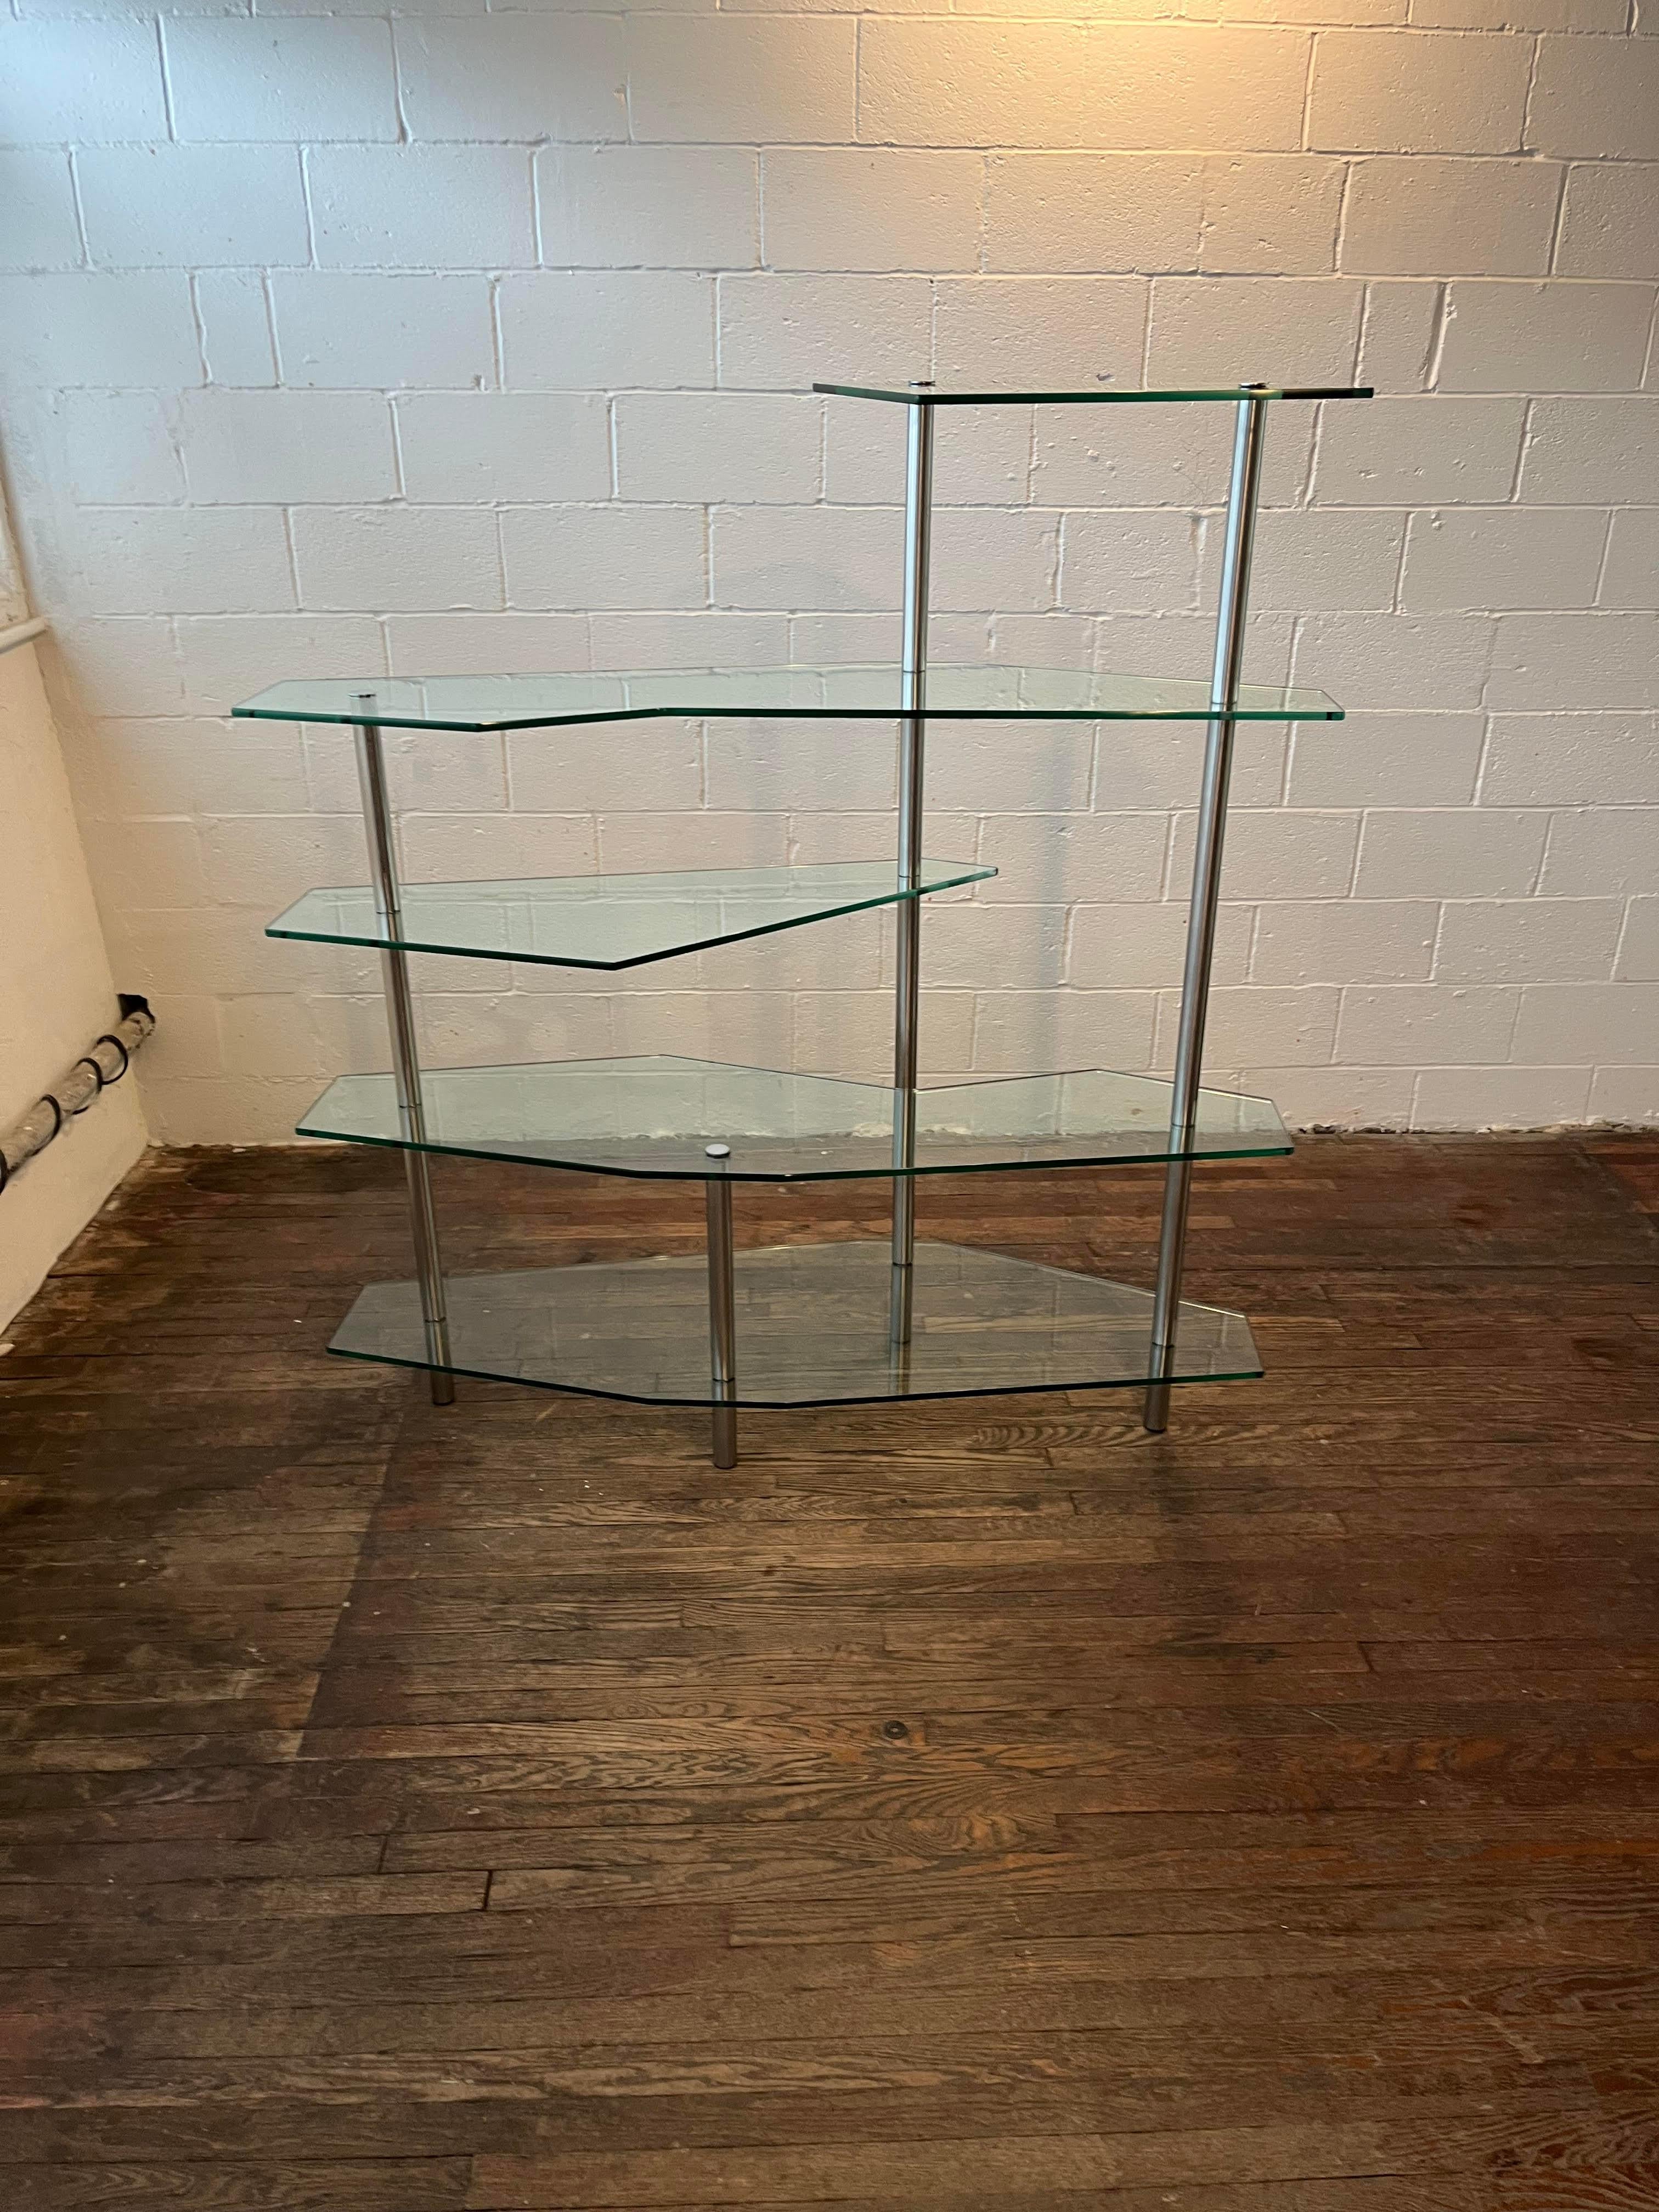 Late 20th Century Modern Freeform Steel and Glass Shelving Unit For Sale